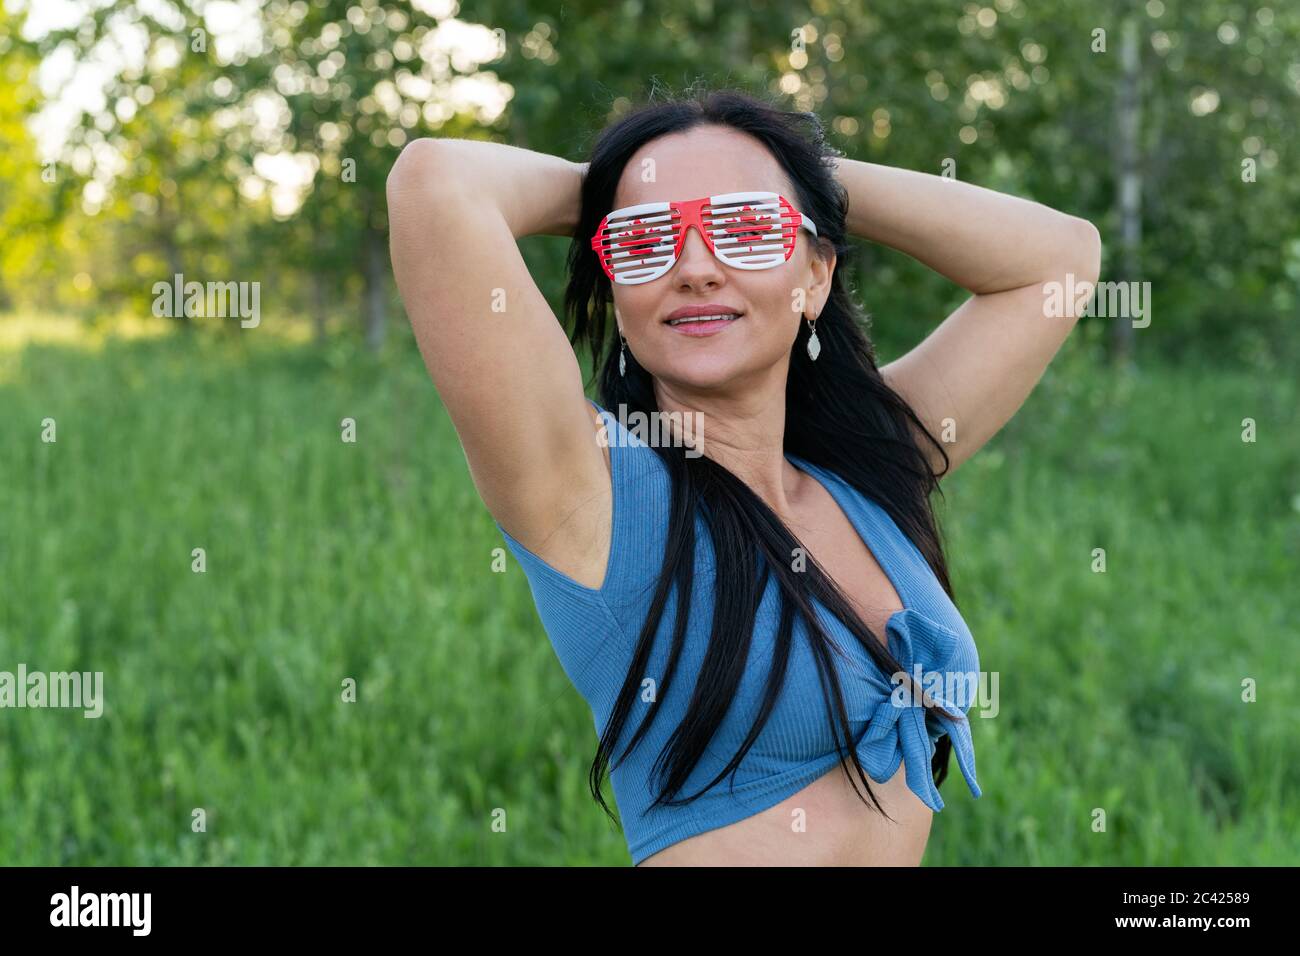 Happy Canada Day Celebration concept. Brunette woman with Canadian flag and themed sunglasses on nature background. Stock Photo